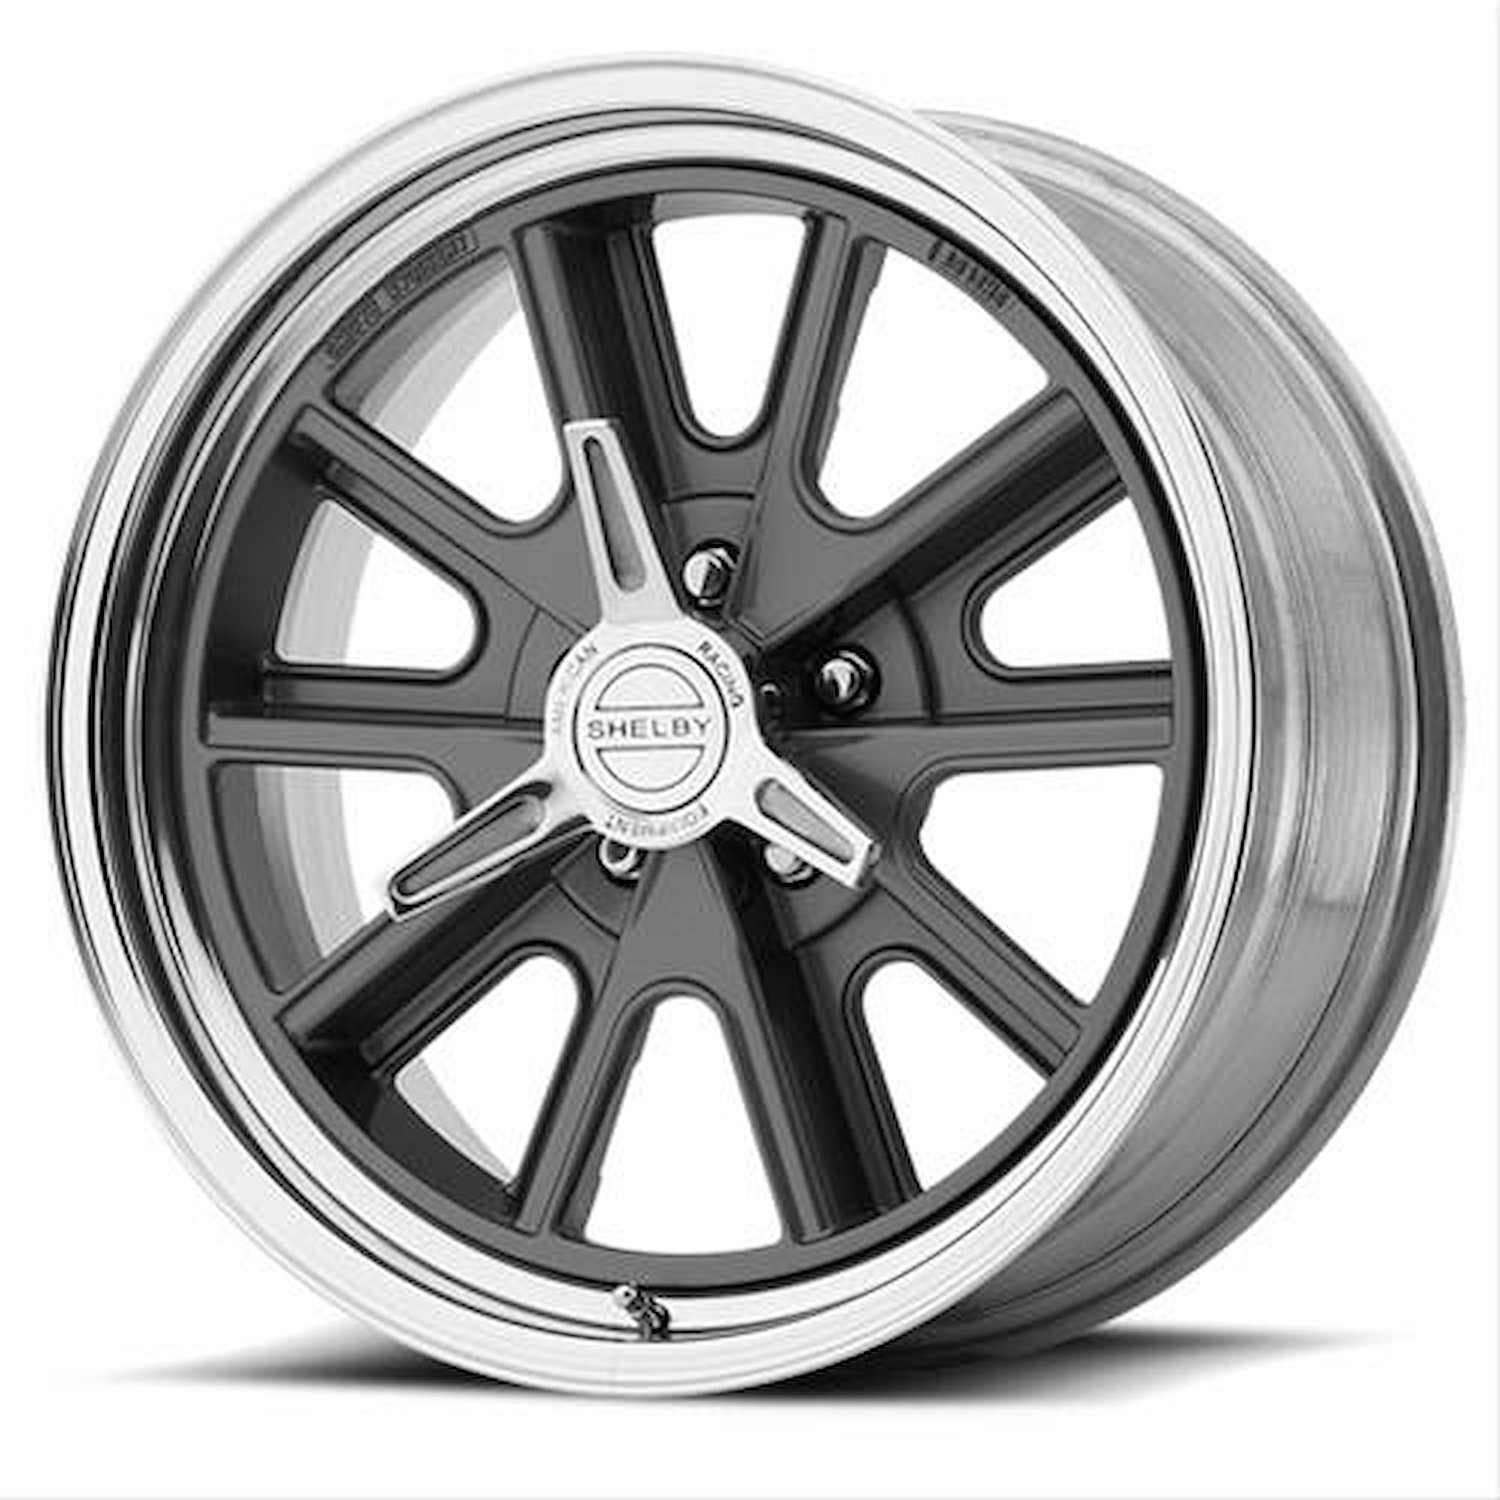 AMERICAN RACING 427 SHELBY COBRA TWO-PIECE MAG GRAY CENTER POLISHED BARREL 17 x 11 5x4.5 -63 3.52